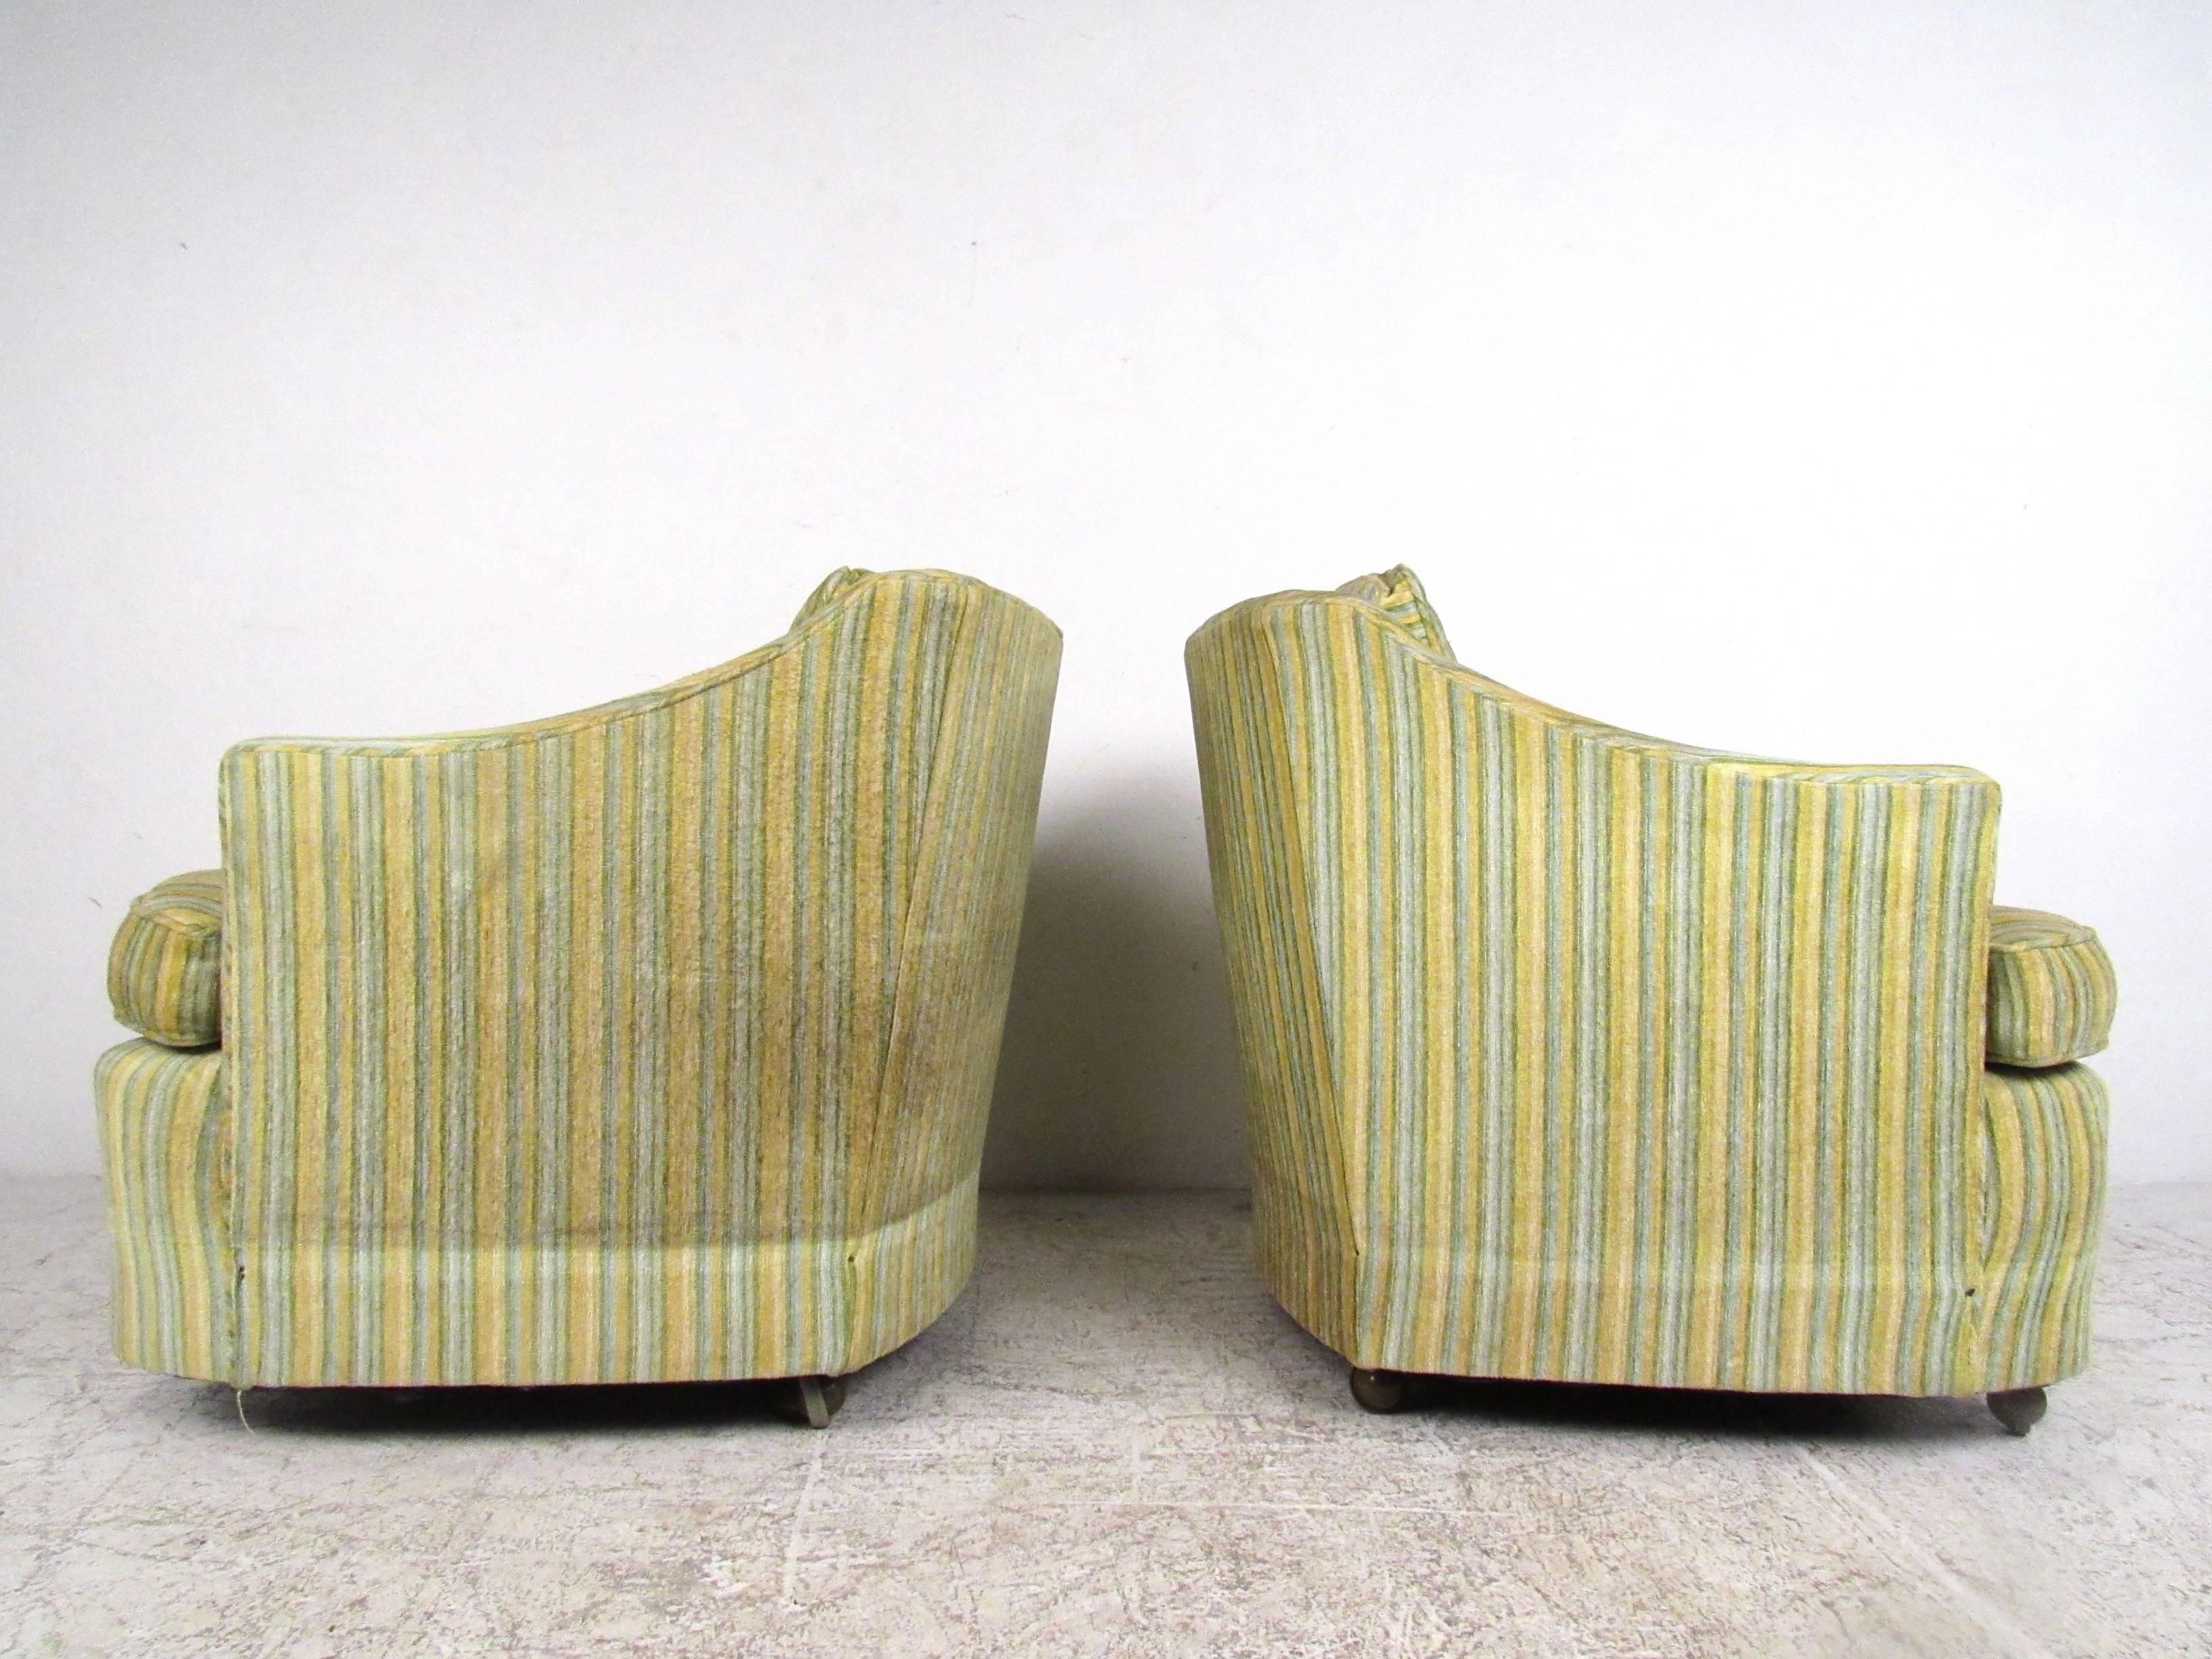 American Pair of Mid-Century Modern Lounge Chairs for Heritage Furniture